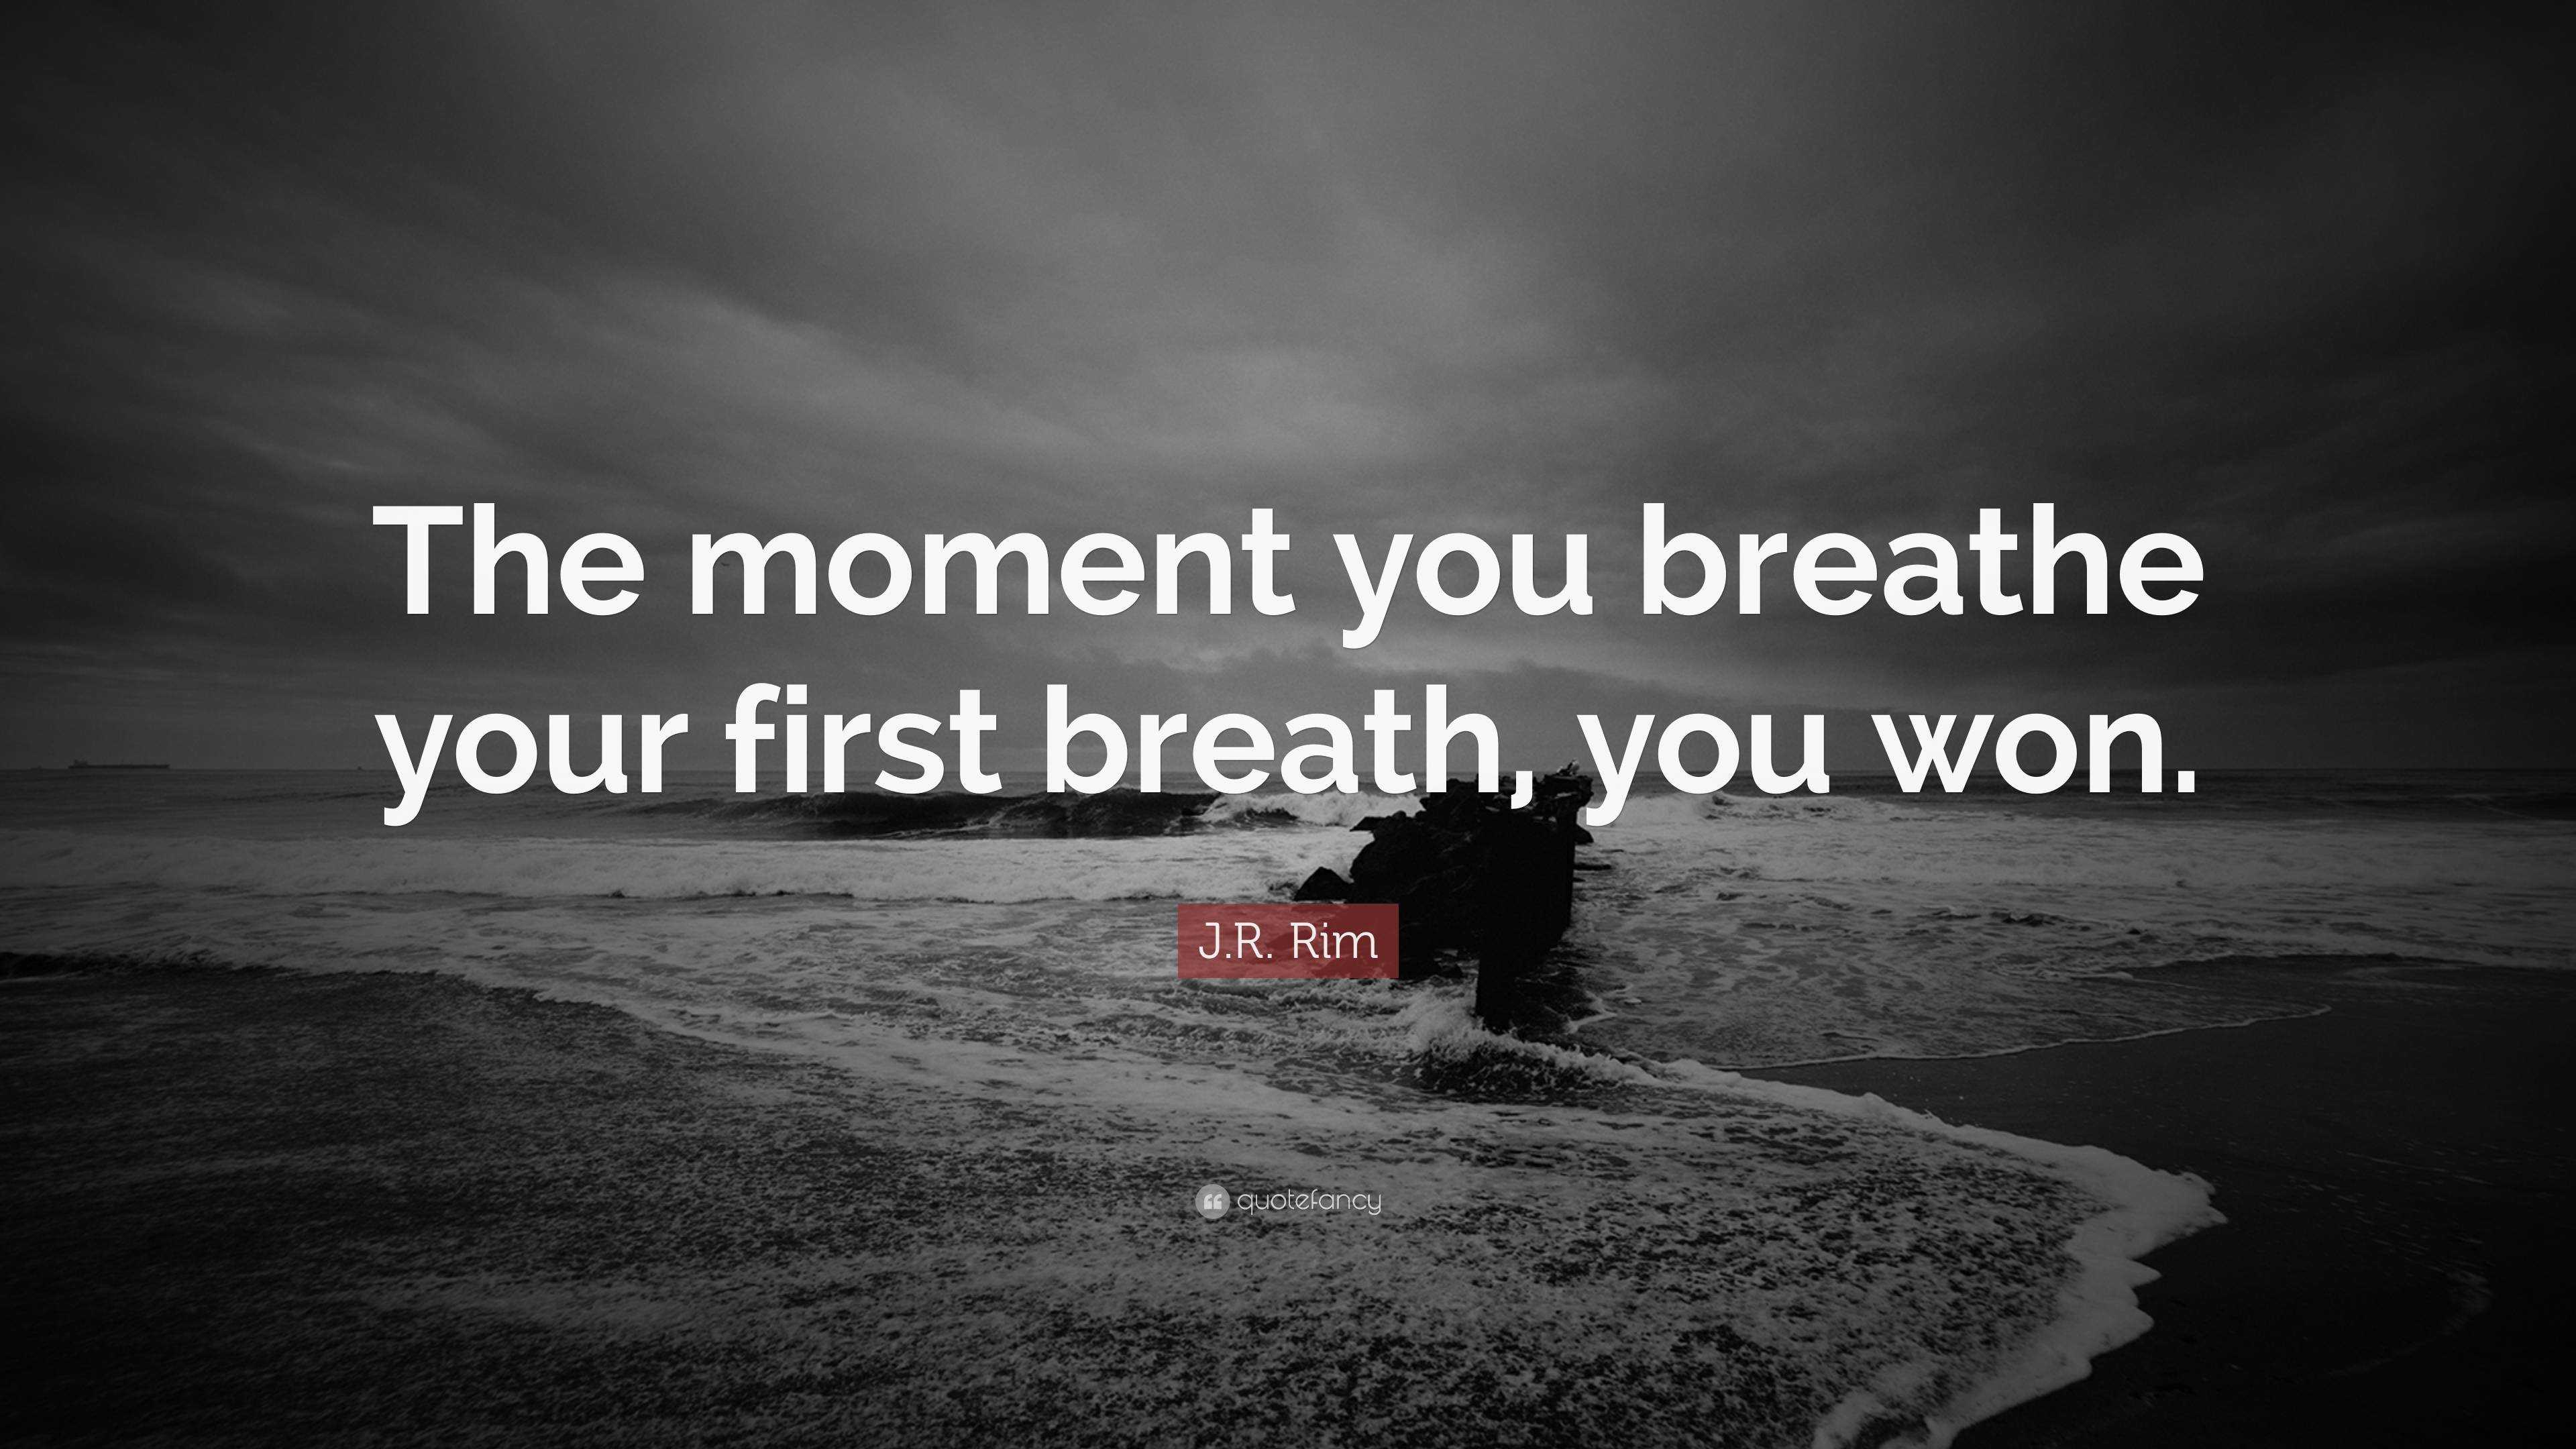 J.R. Rim Quote: “The moment you breathe your first breath, you won.”